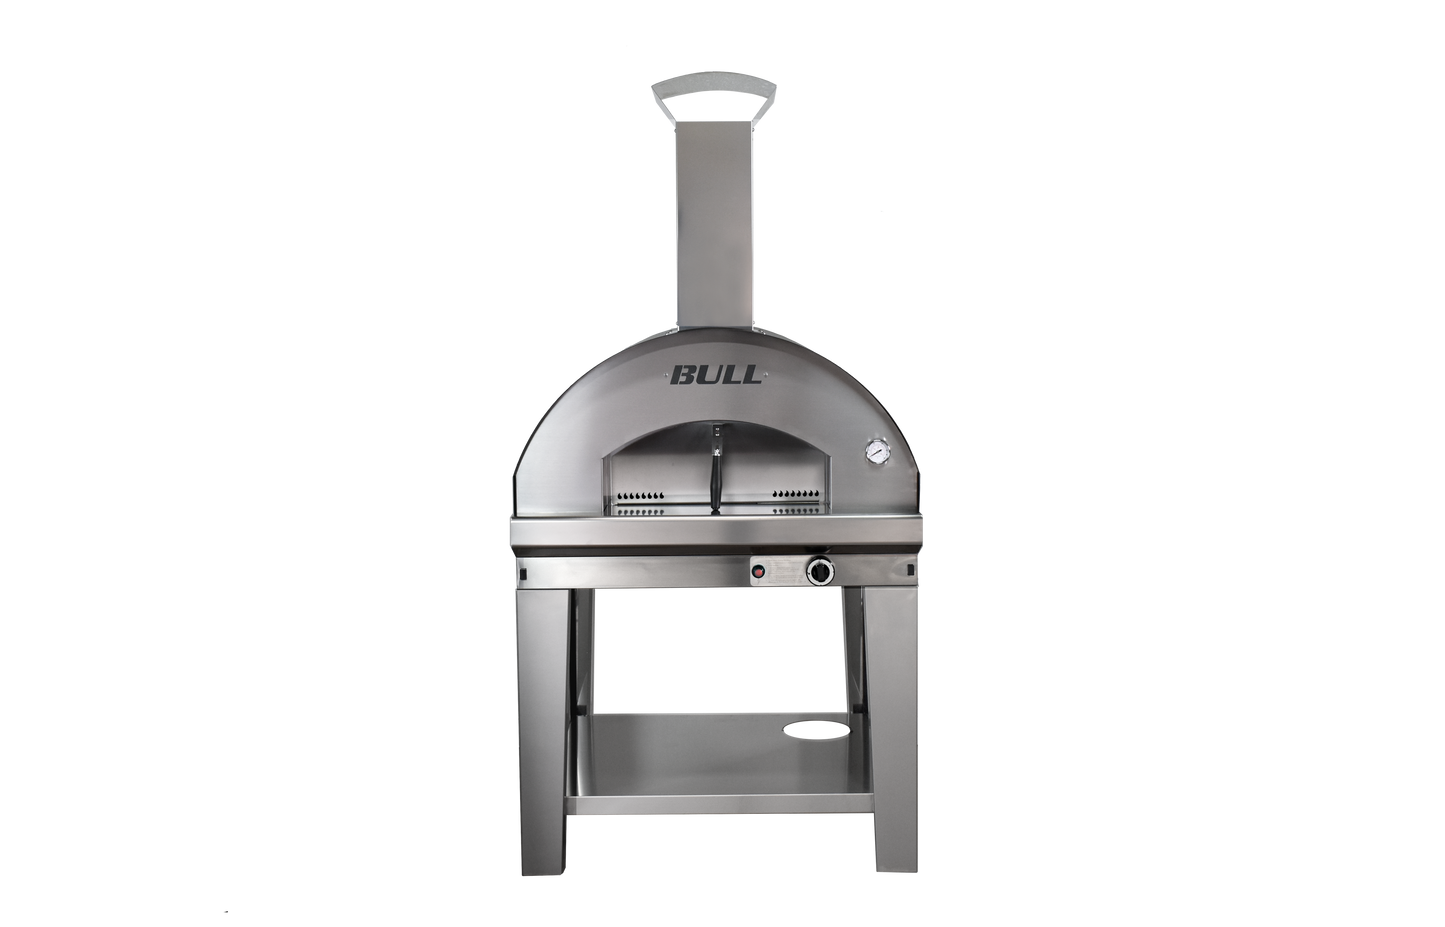 BULL GAS FUELLED Large Pizza Oven 60x60cm & Complete Oven And Cart